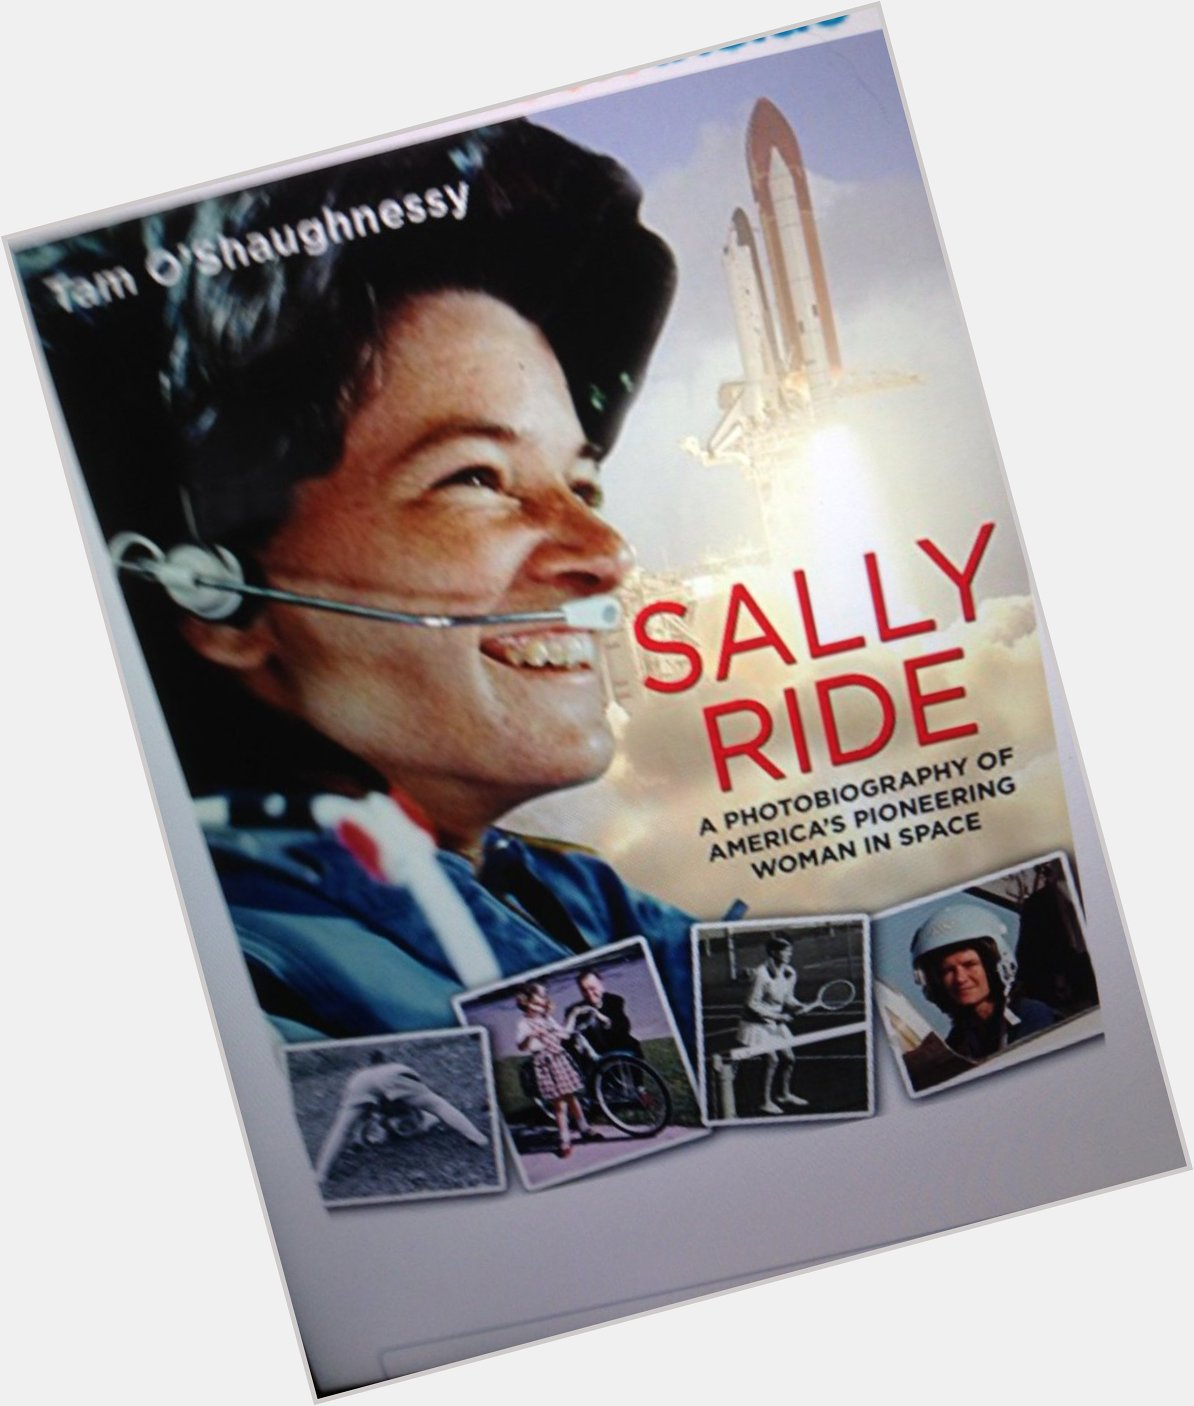 Happy Birthday Sally Ride! Have you read this photobiography by Tam O\Shaughnessy? 